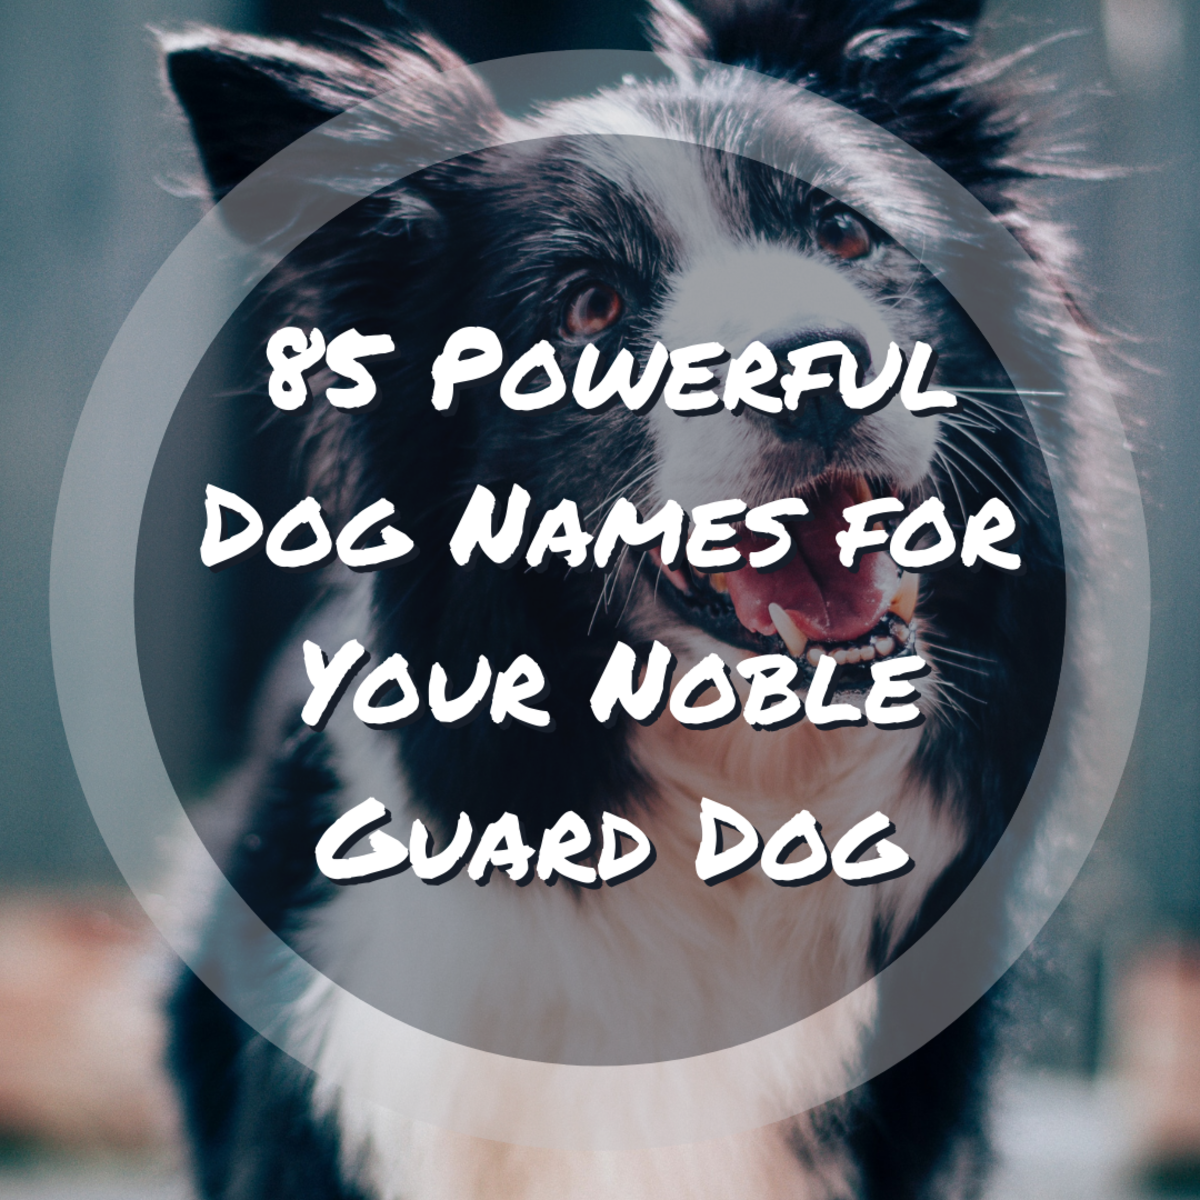 95 Powerful Dog Names for Your Loyal, Noble Guard Dog